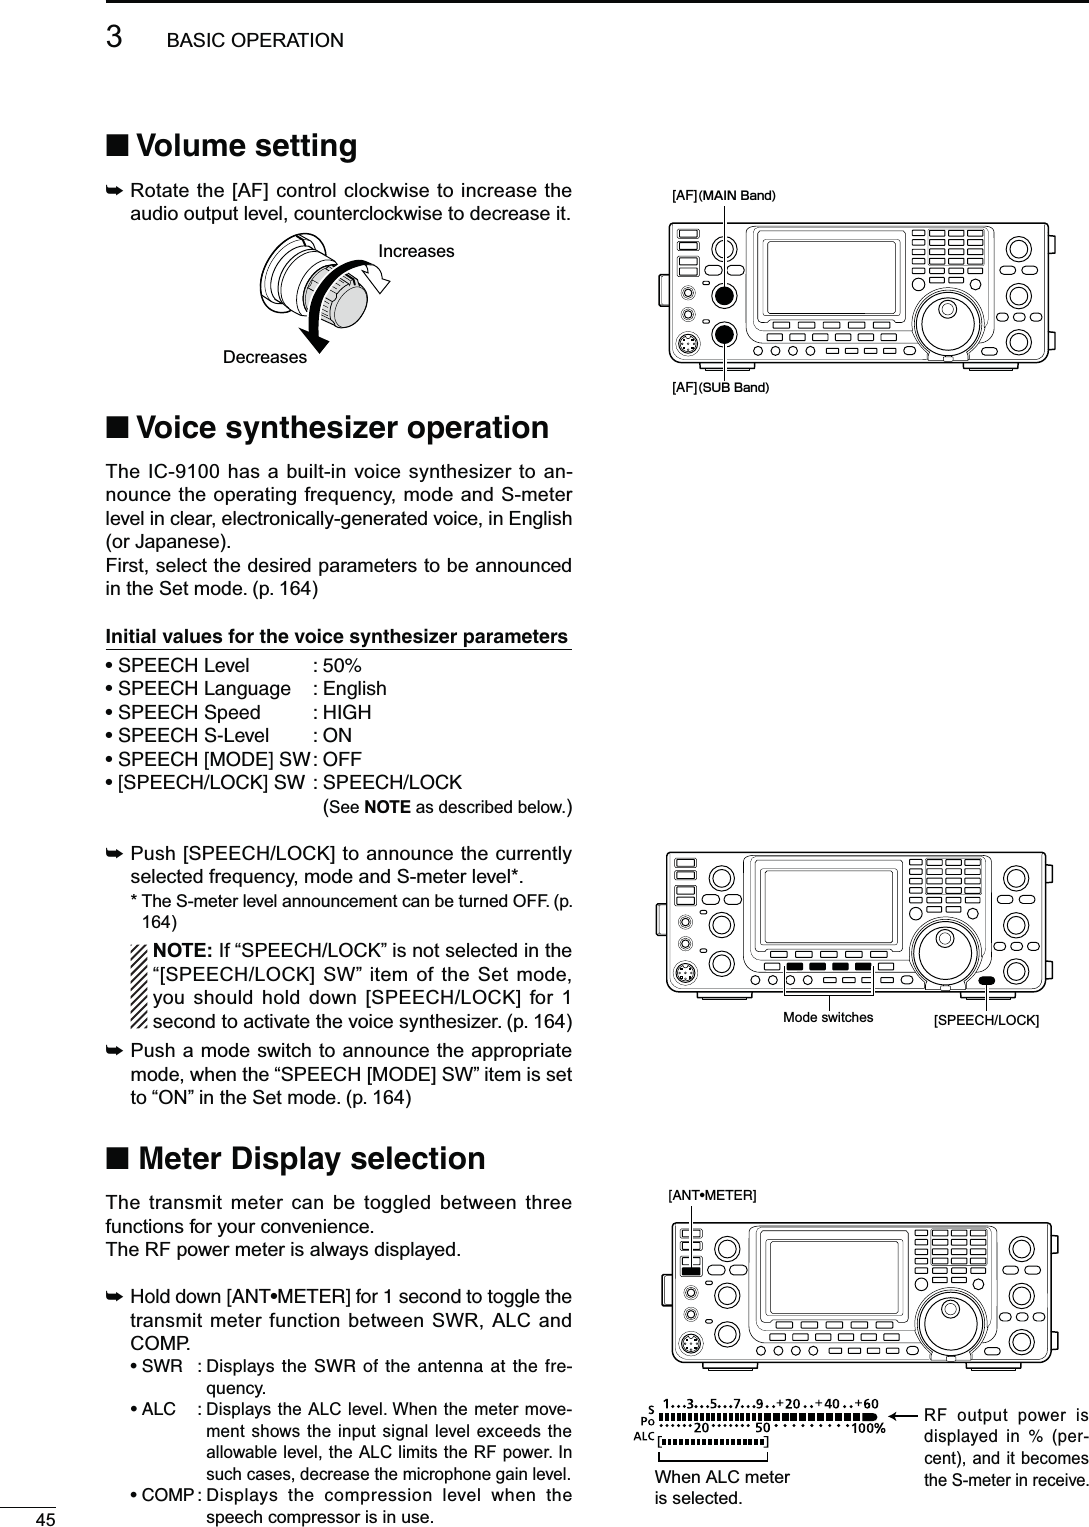 453BASIC OPERATIONN6OLUMESETTING±  Rotate the [AF] control clockwise to increase the audio output level, counterclockwise to decrease it.IncreasesDecreasesN6OICESYNTHESIZEROPERATIONThe IC-9100 has a built-in voice synthesizer to an-nounce the operating frequency, mode and S-meter level in clear, electronically-generated voice, in English (or Japanese).First, select the desired parameters to be announced in the Set mode. (p. 164))NITIALVALUESFORTHEVOICESYNTHESIZERPARAMETERSs30%%#(,EVEL s30%%#(,ANGUAGE %NGLISHs30%%#(3PEED ()&apos;(s30%%#(3,EVEL /.s30%%#(;-/$%=37/&amp;&amp;s;30%%#(,/#+=3730%%#(,/#+(See NOTE as described below.)±  Push [SPEECH/LOCK] to announce the currently selected frequency, mode and S-meter level*.* The S-meter level announcement can be turned OFF. (p. 164)NOTE: If “SPEECH/LOCK” is not selected in the “[SPEECH/LOCK] SW” item of the Set mode, you should hold down [SPEECH/LOCK] for 1 second to activate the voice synthesizer. (p. 164)±  Push a mode switch to announce the appropriate mode, when the “SPEECH [MODE] SW” item is set to “ON” in the Set mode. (p. 164)N-ETER$ISPLAYSELECTIONThe transmit meter can be toggled between three functions for your convenience.The RF power meter is always displayed.±(OLDDOWN;!.4s-%4%2=FORSECONDTOTOGGLETHEtransmit meter function between SWR, ALC and COMP. s372 $ISPLAYSTHE372OFTHEANTENNAATTHEFRE-quency. s!,# Displays the ALC level. When the meter move-ment shows the input signal level exceeds the allowable level, the ALC limits the RF power. In such cases, decrease the microphone gain level. s#/-0$ISPLAYS THE COMPRESSION LEVEL WHEN THEspeech compressor is in use.[AF](MAIN Band)[AF](SUB Band)Mode switches [SPEECH/LOCK]]When ALC meter is selected.RF output power is DISPLAYED IN  PER-cent), and it becomes the S-meter in receive.